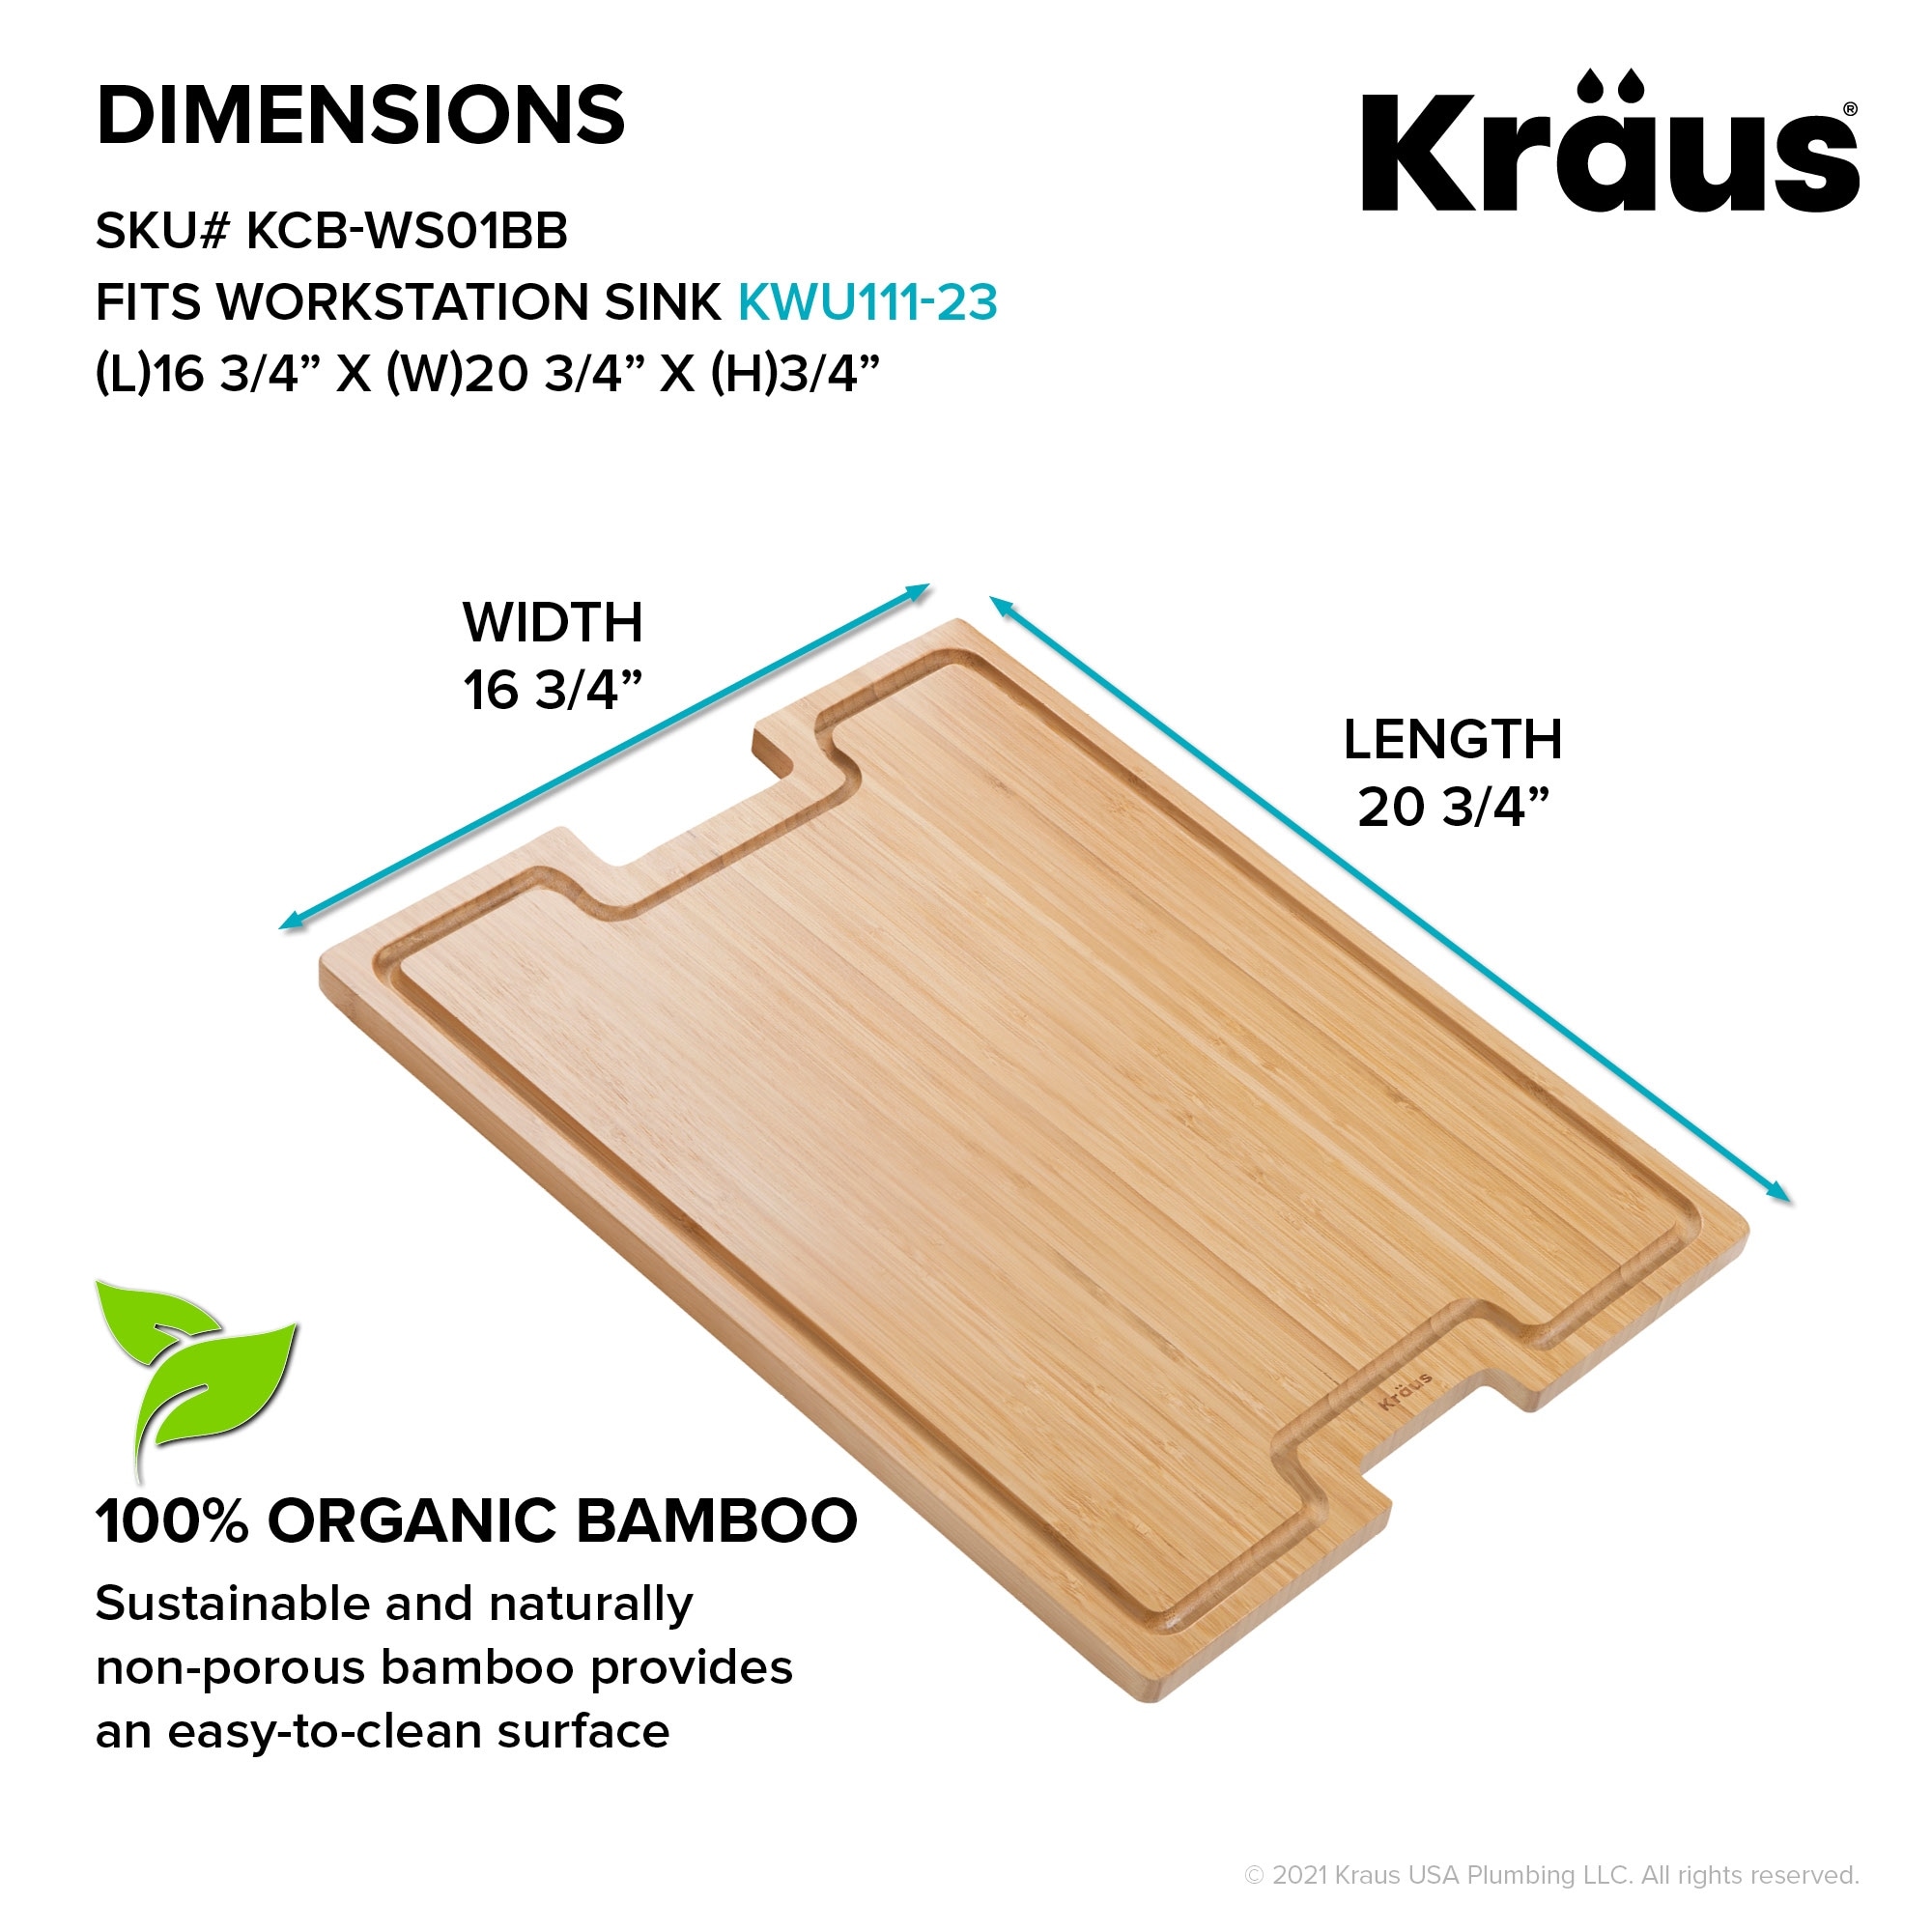 Solid Bamboo Cutting Board For Workstation Kitchen Sink